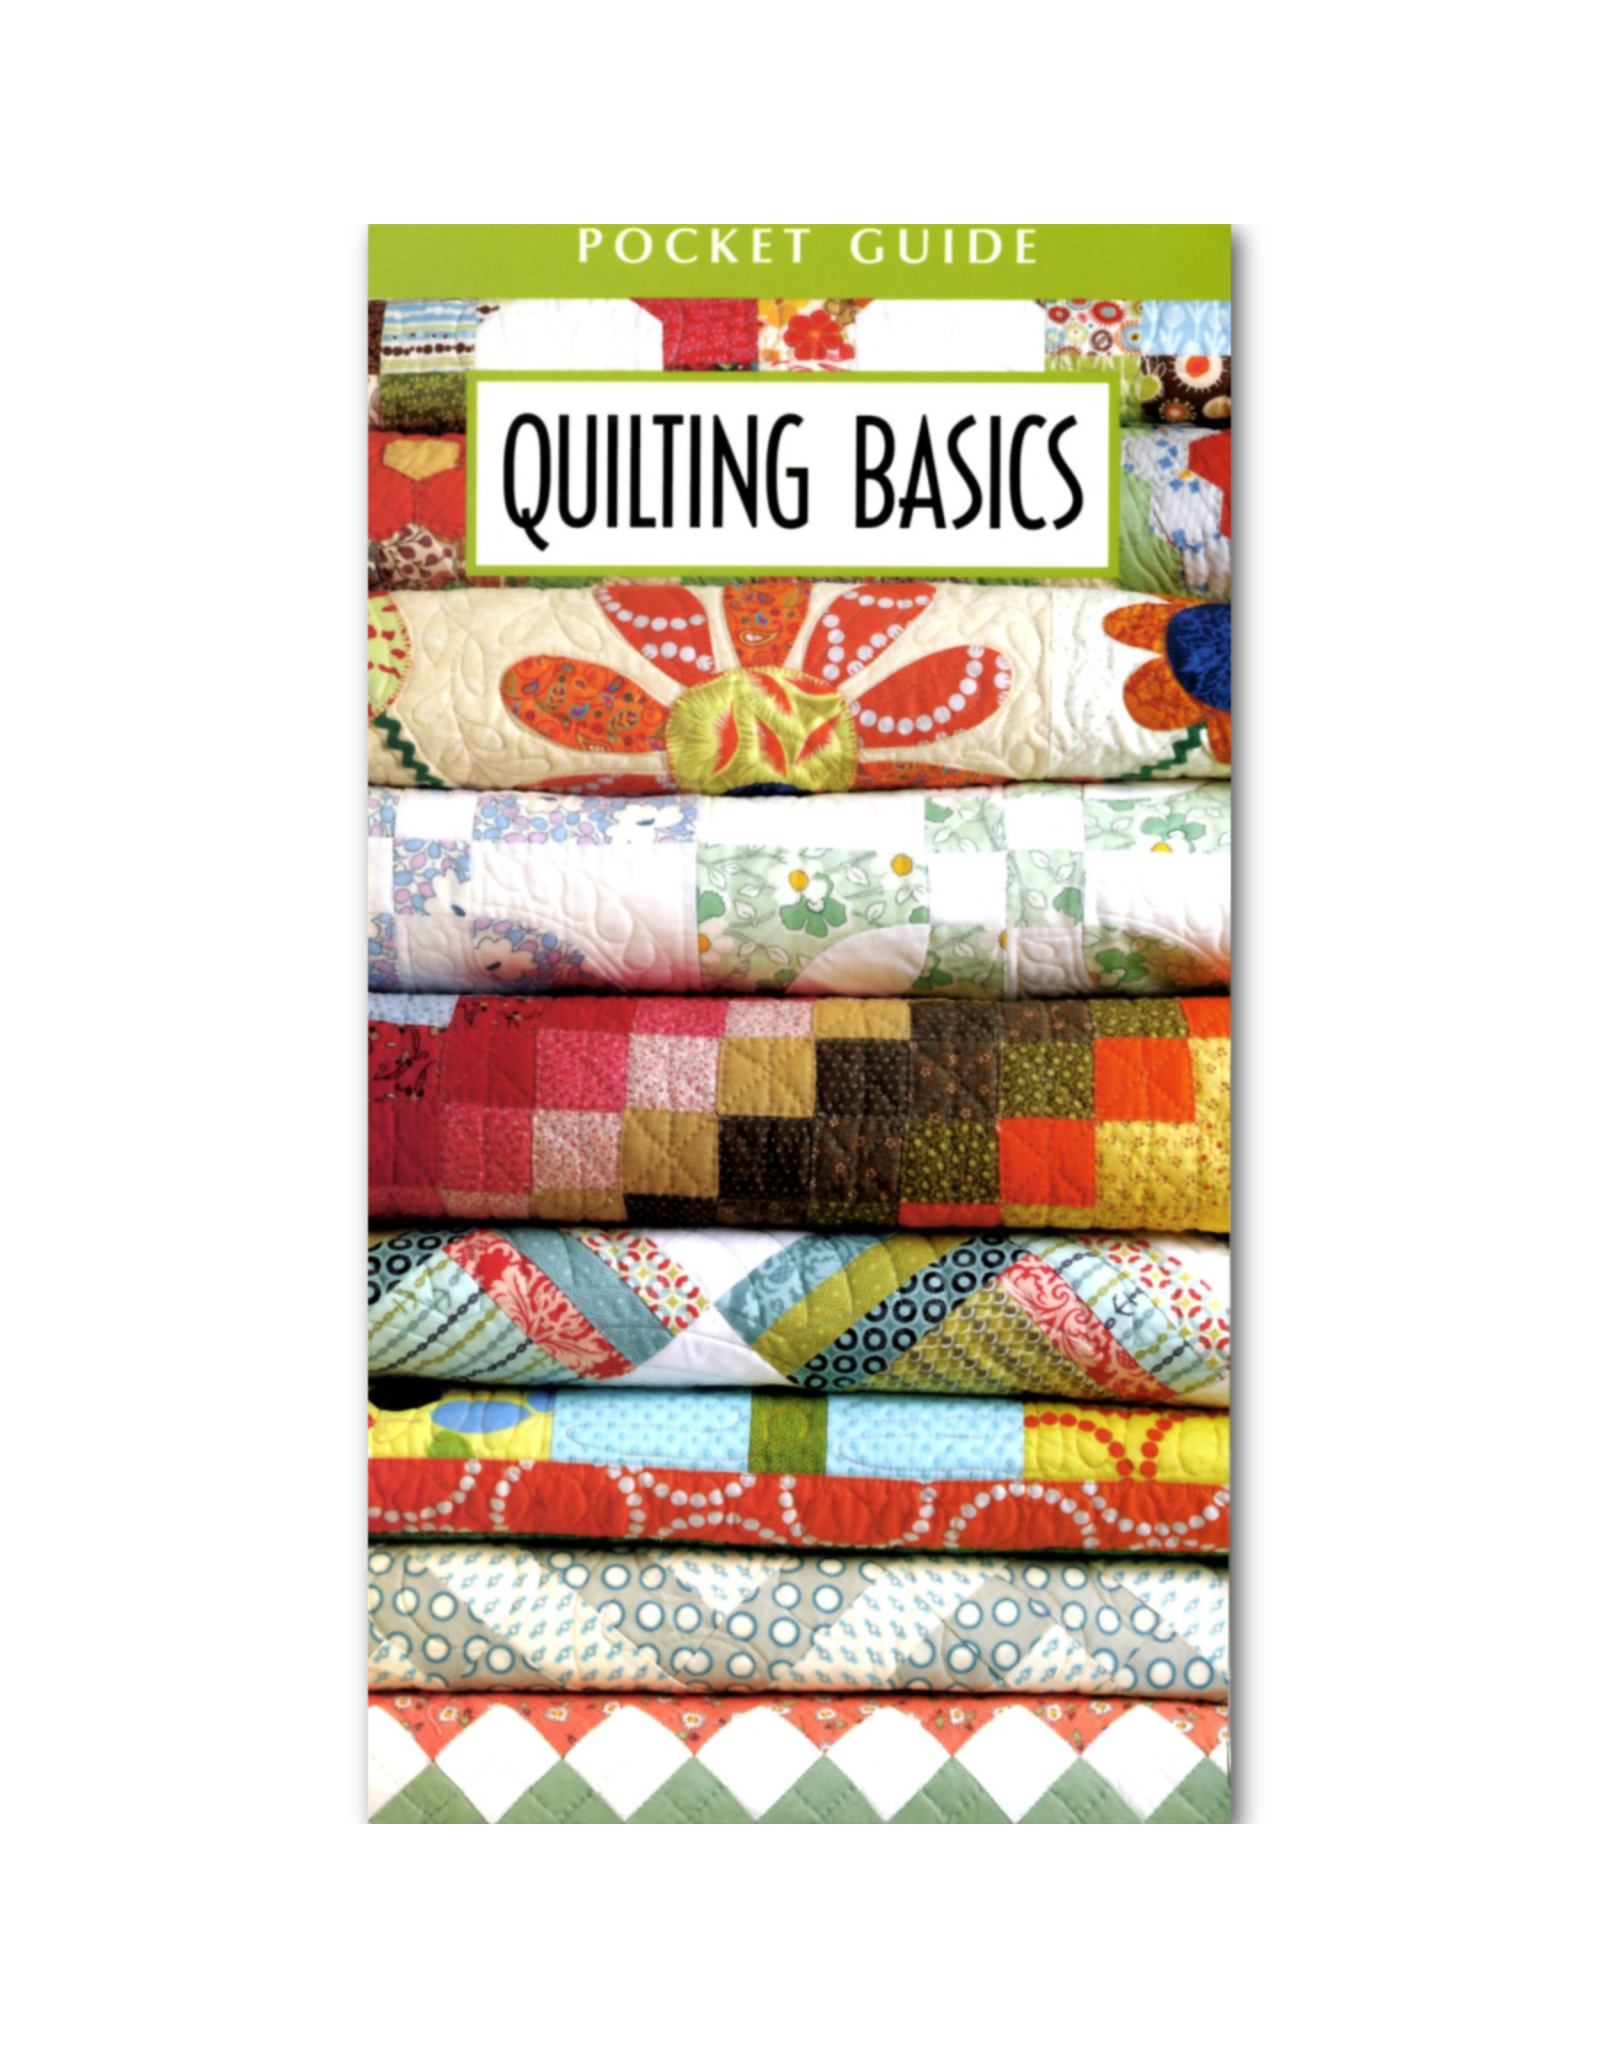 Leisure Arts Quilting Basics Pocket Guide